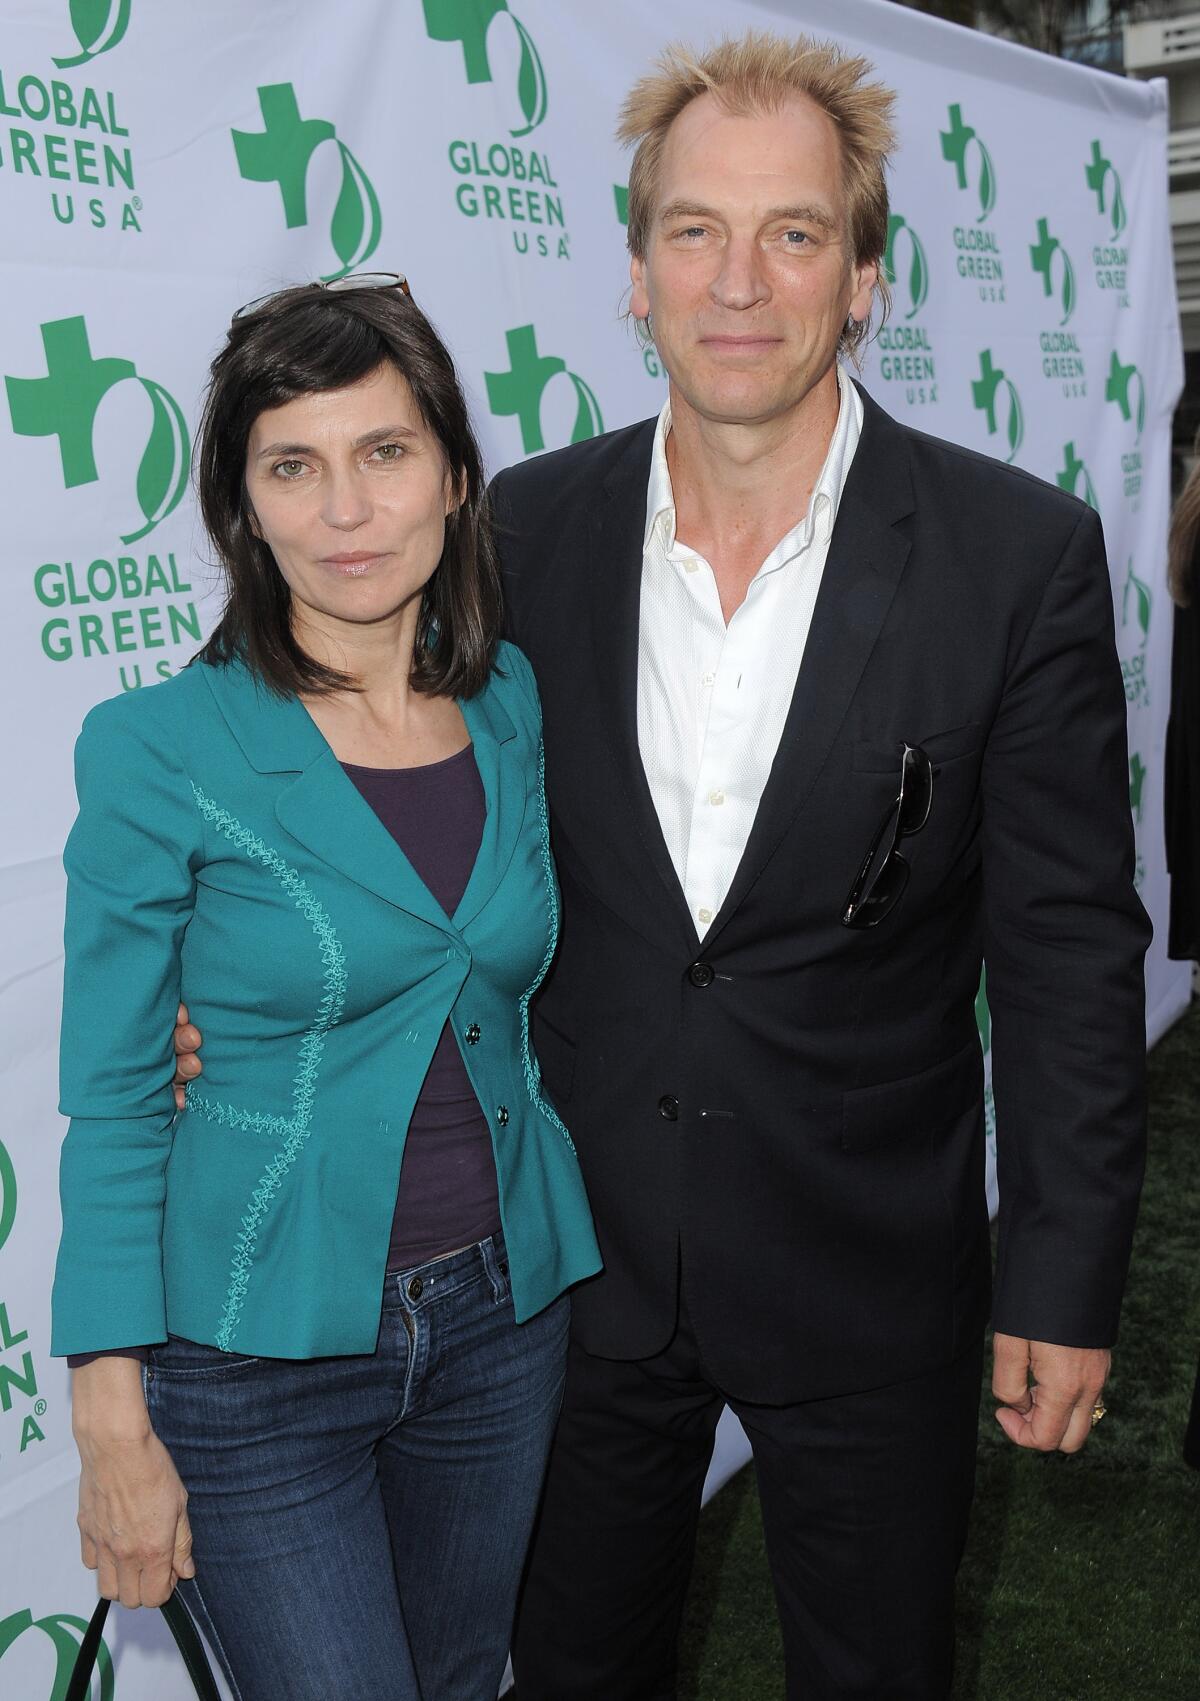 A woman in a green jacket and jeans poses with a man in a white button-down shirt and black suit.